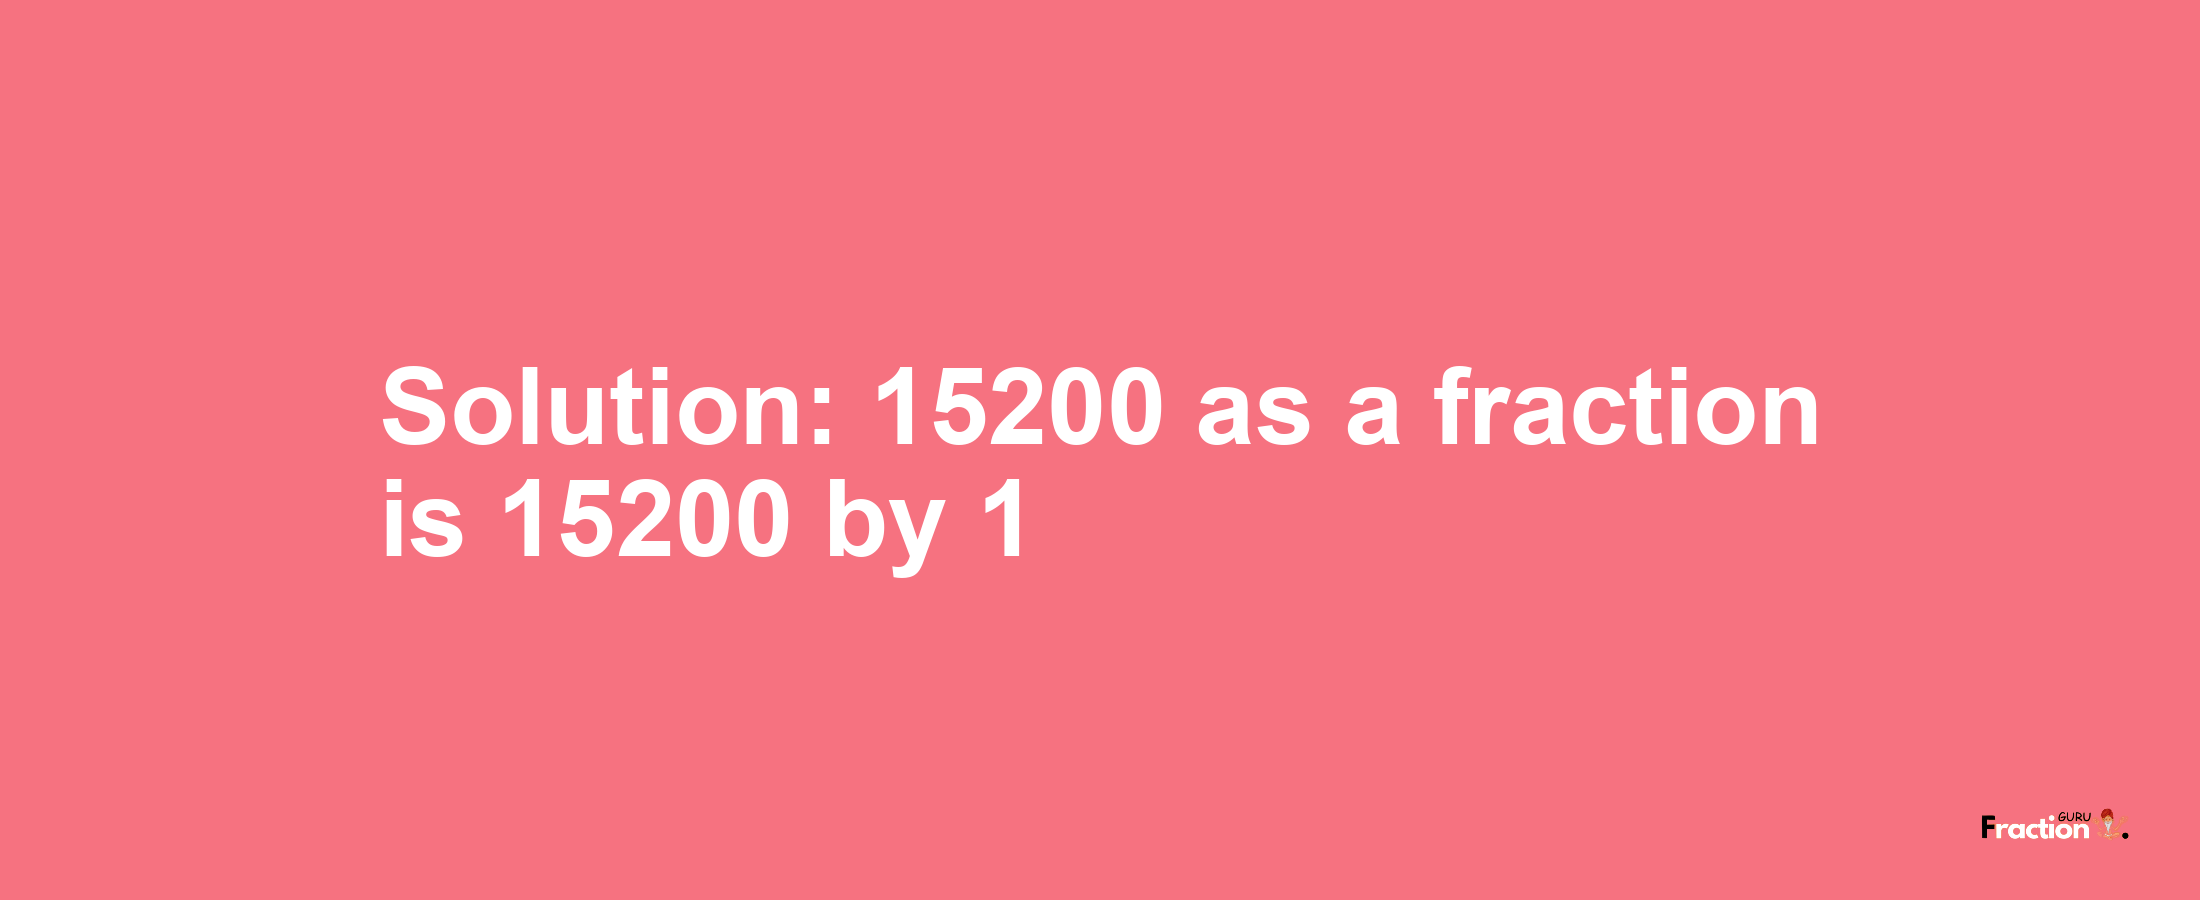 Solution:15200 as a fraction is 15200/1